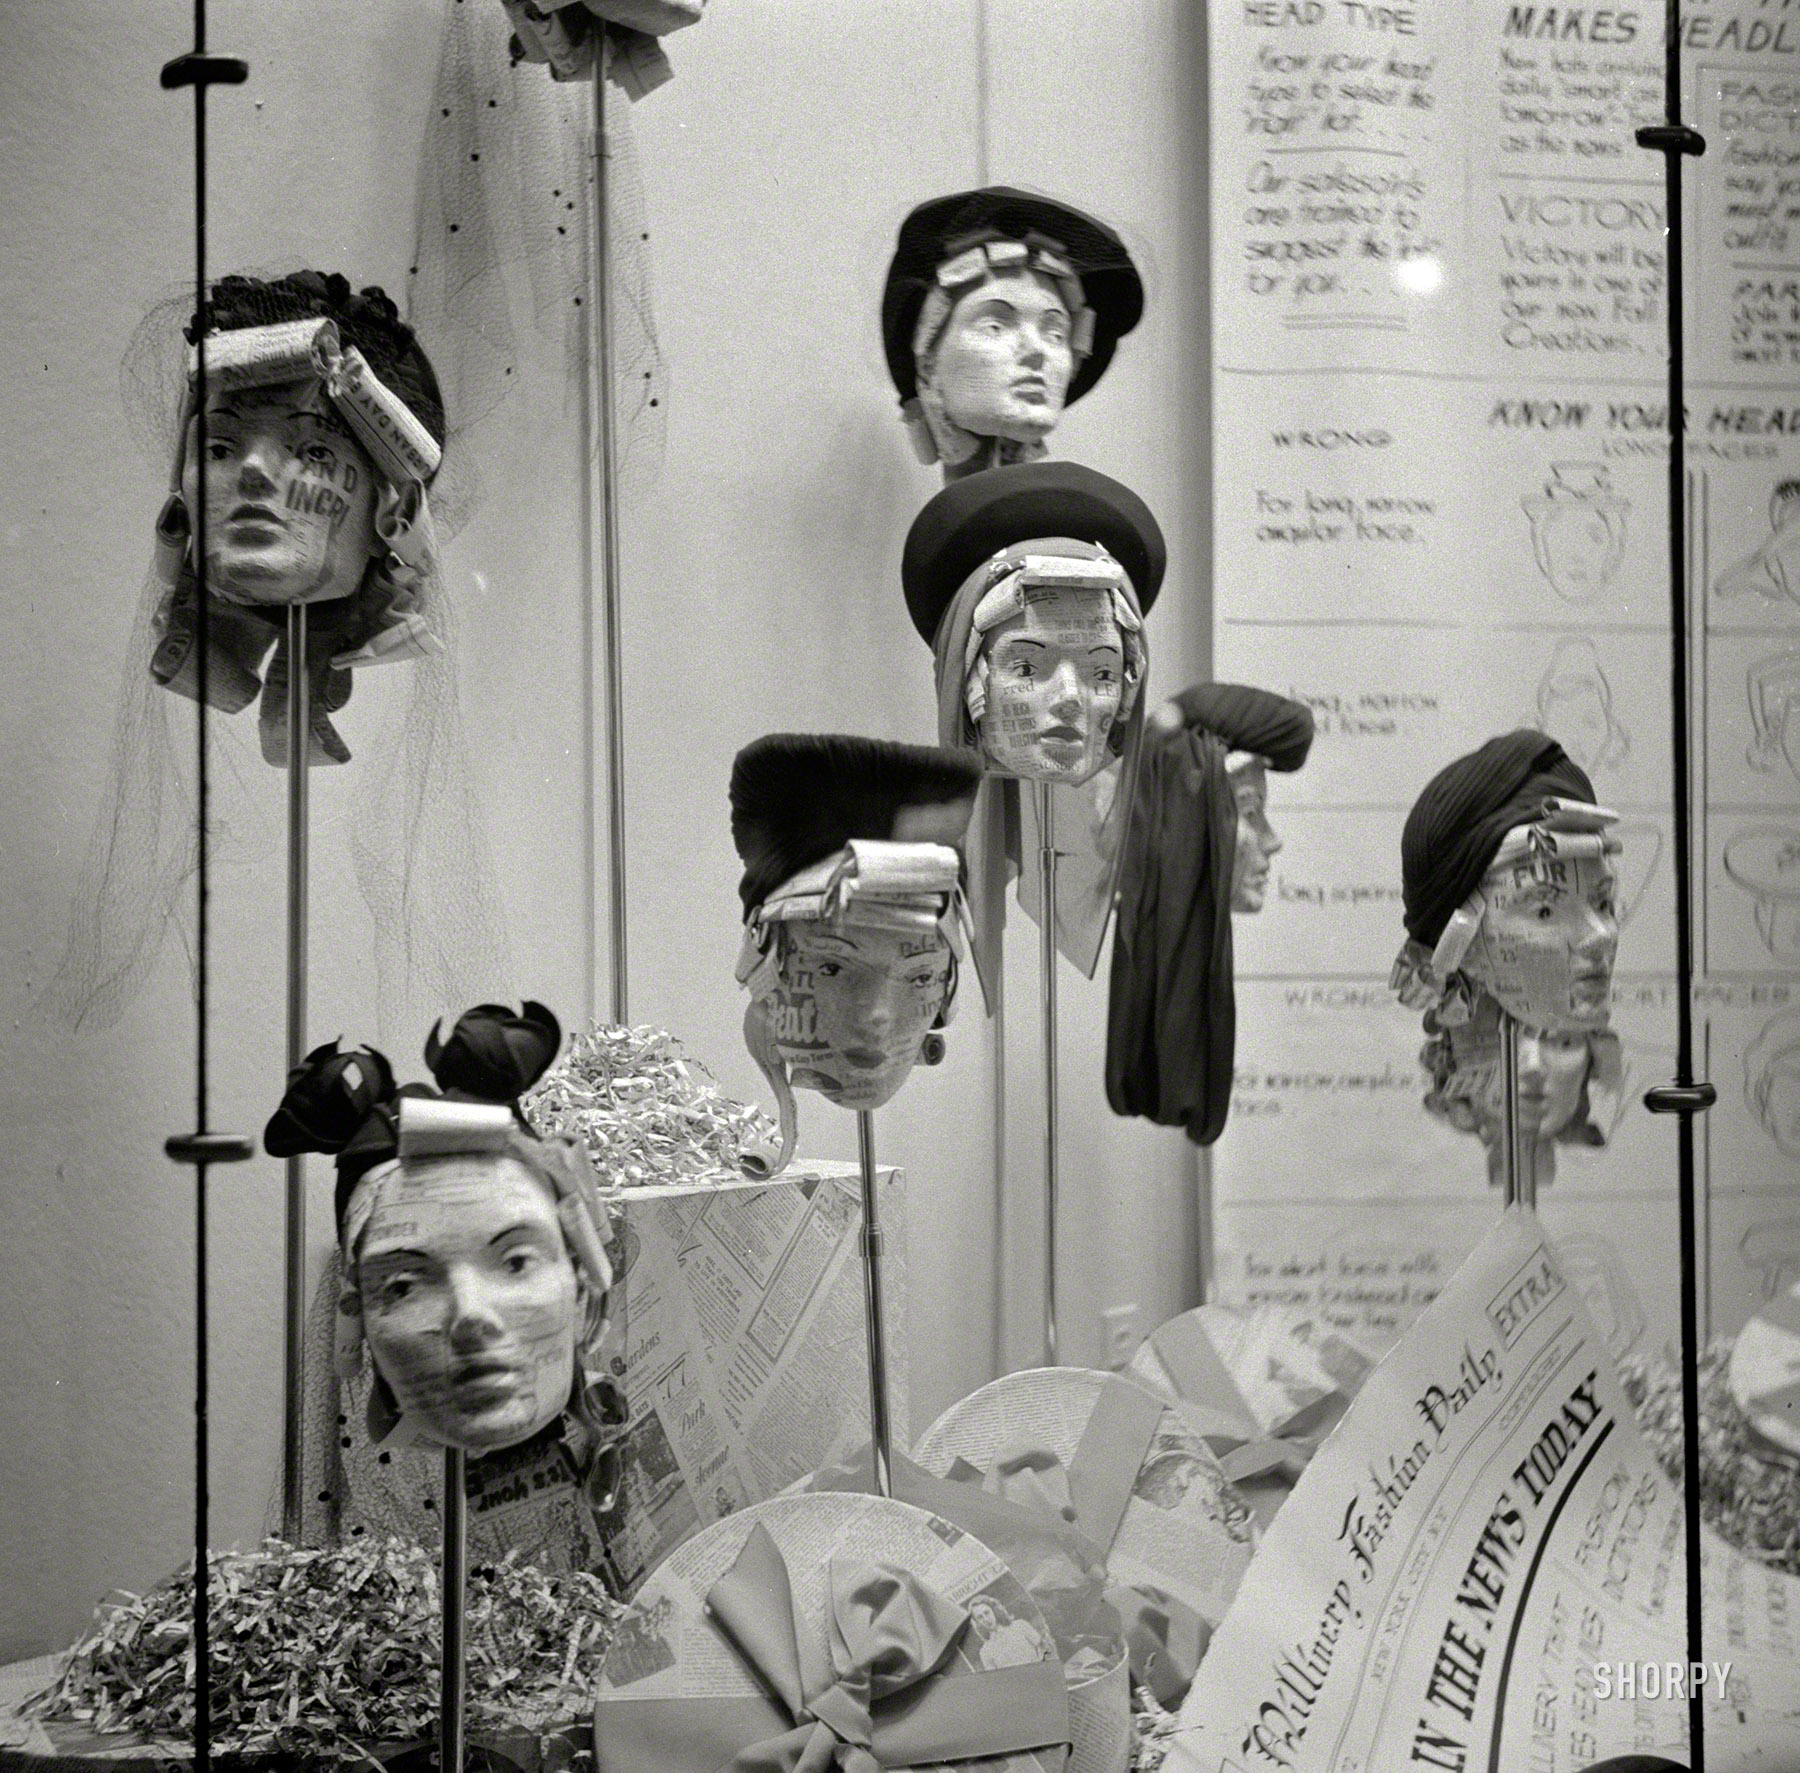 October 1941. "Manikins in store window. Amsterdam, New York." Faces in the News, and vice versa. Medium-format negative by John Collier. View full size.